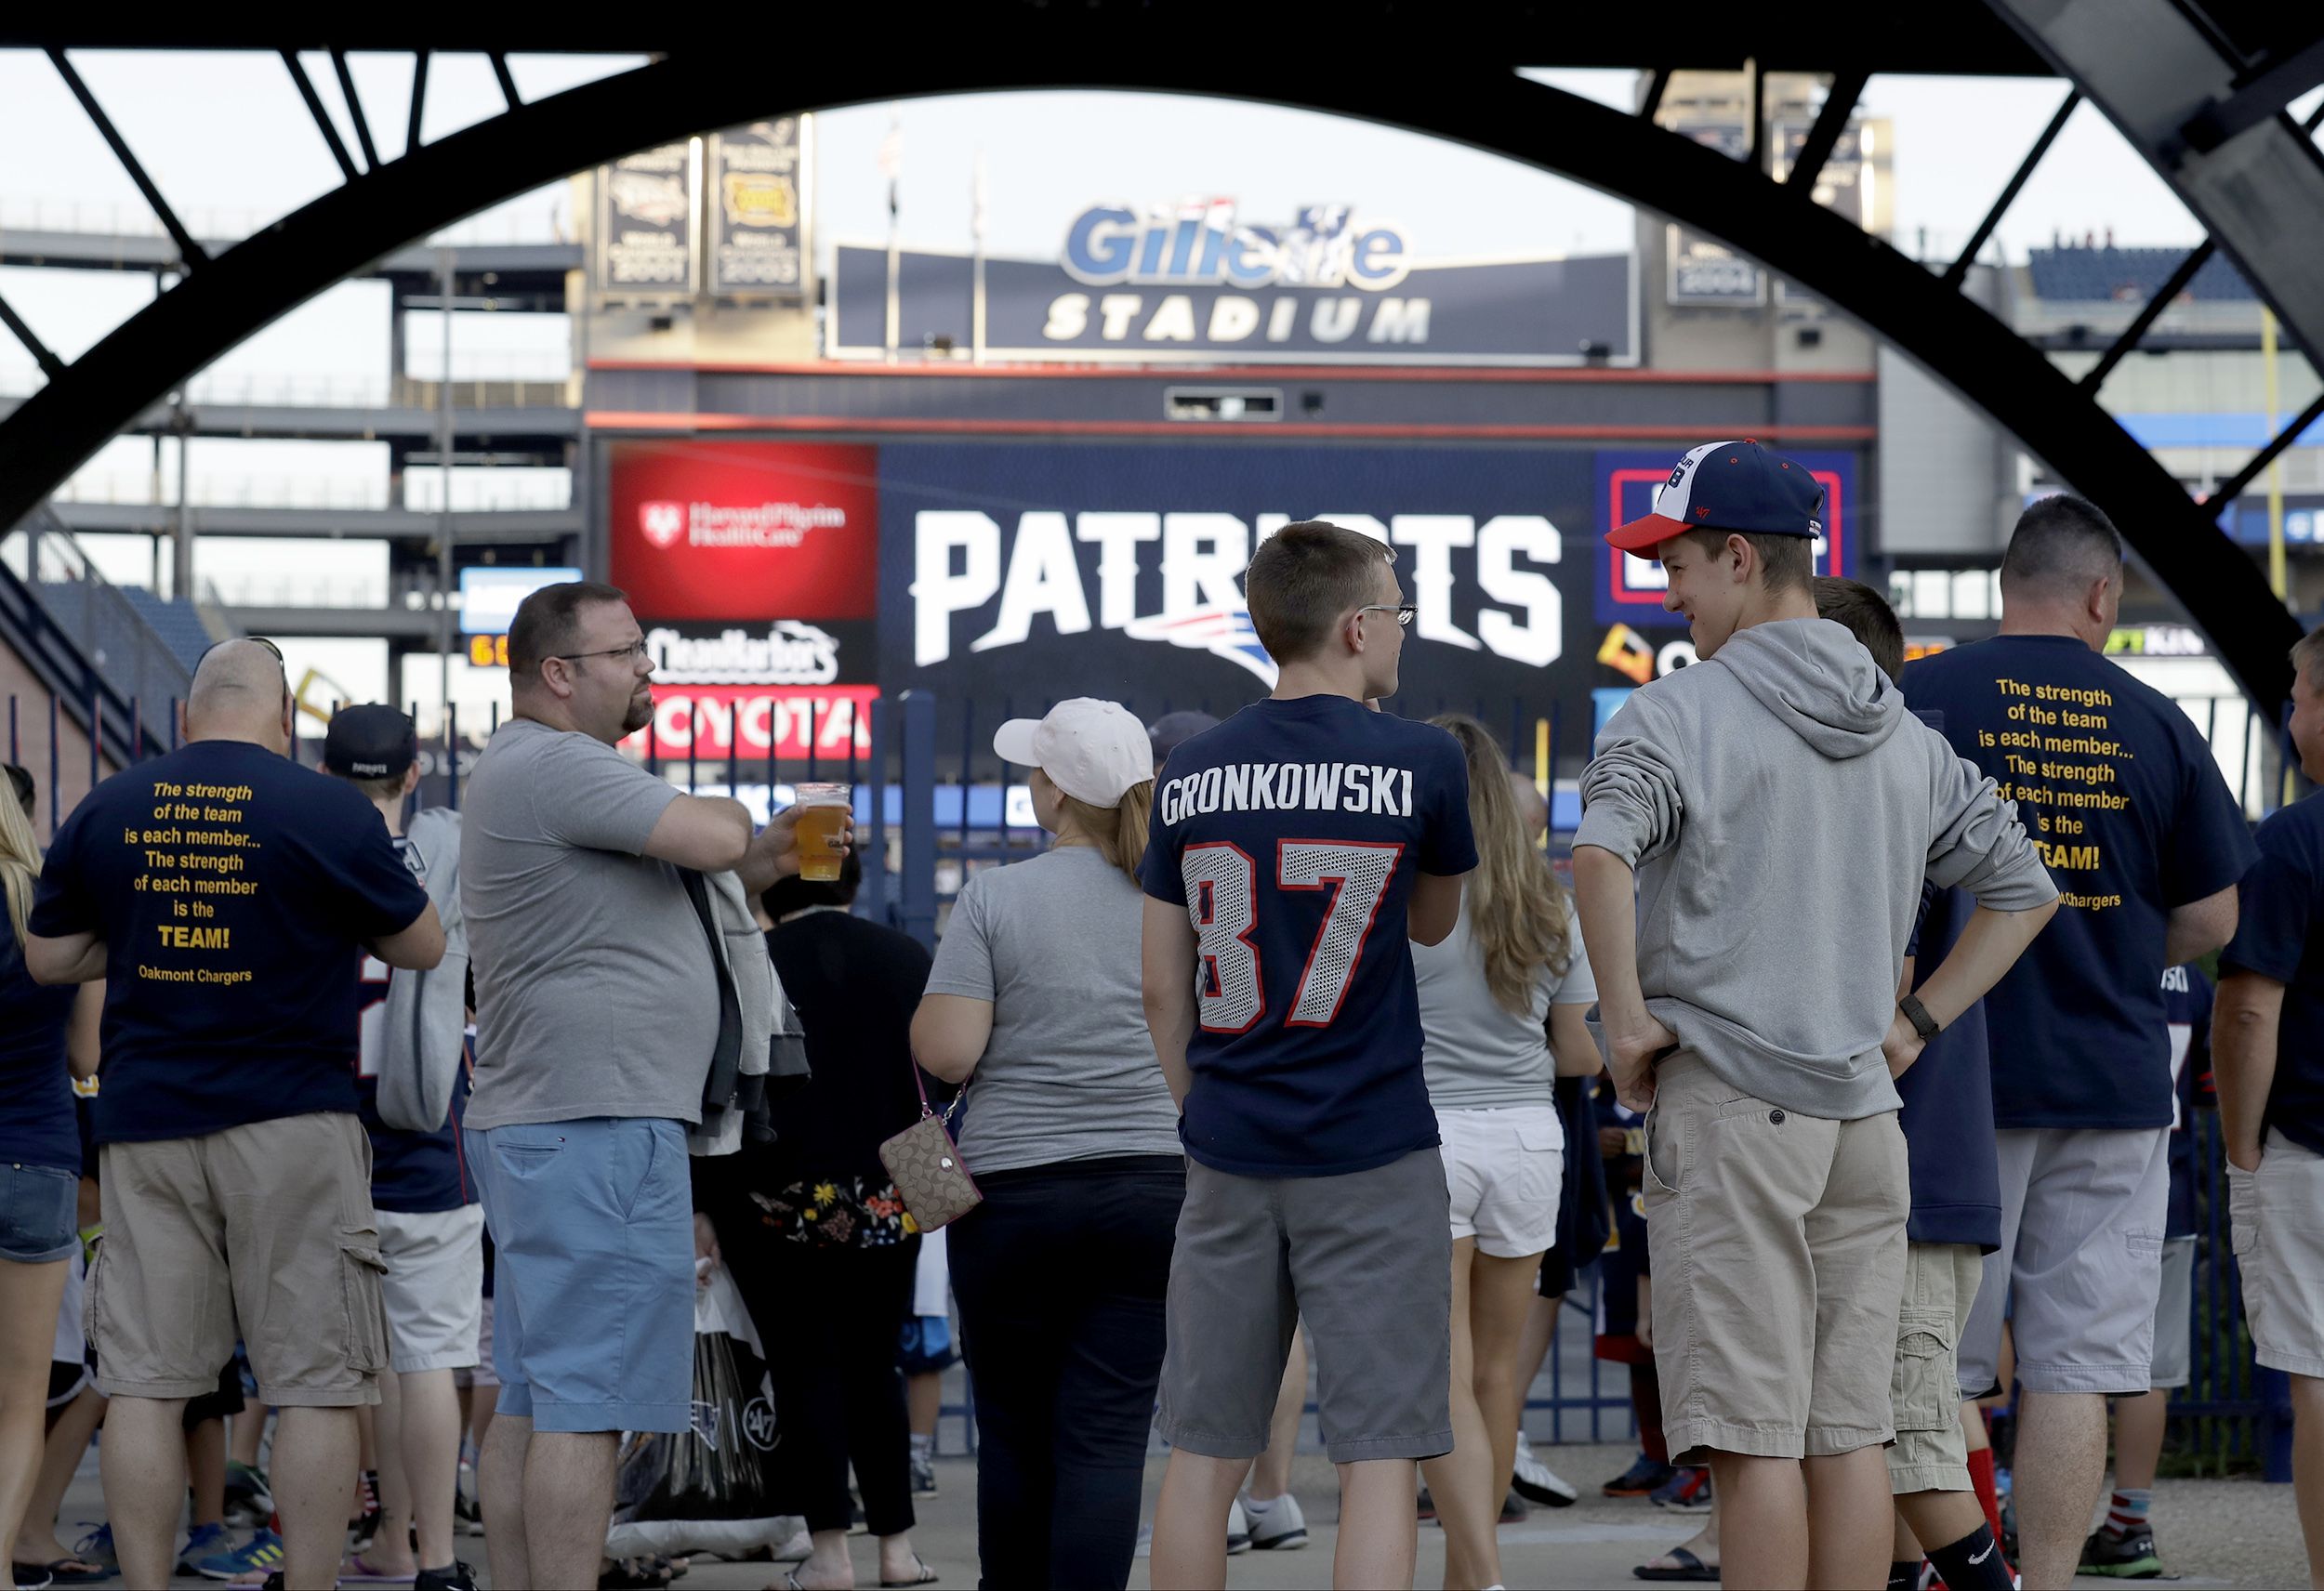 Patriots-Steelers ticket prices: Here's how much it costs to get in to 2019  season opener at Gillette Stadium 